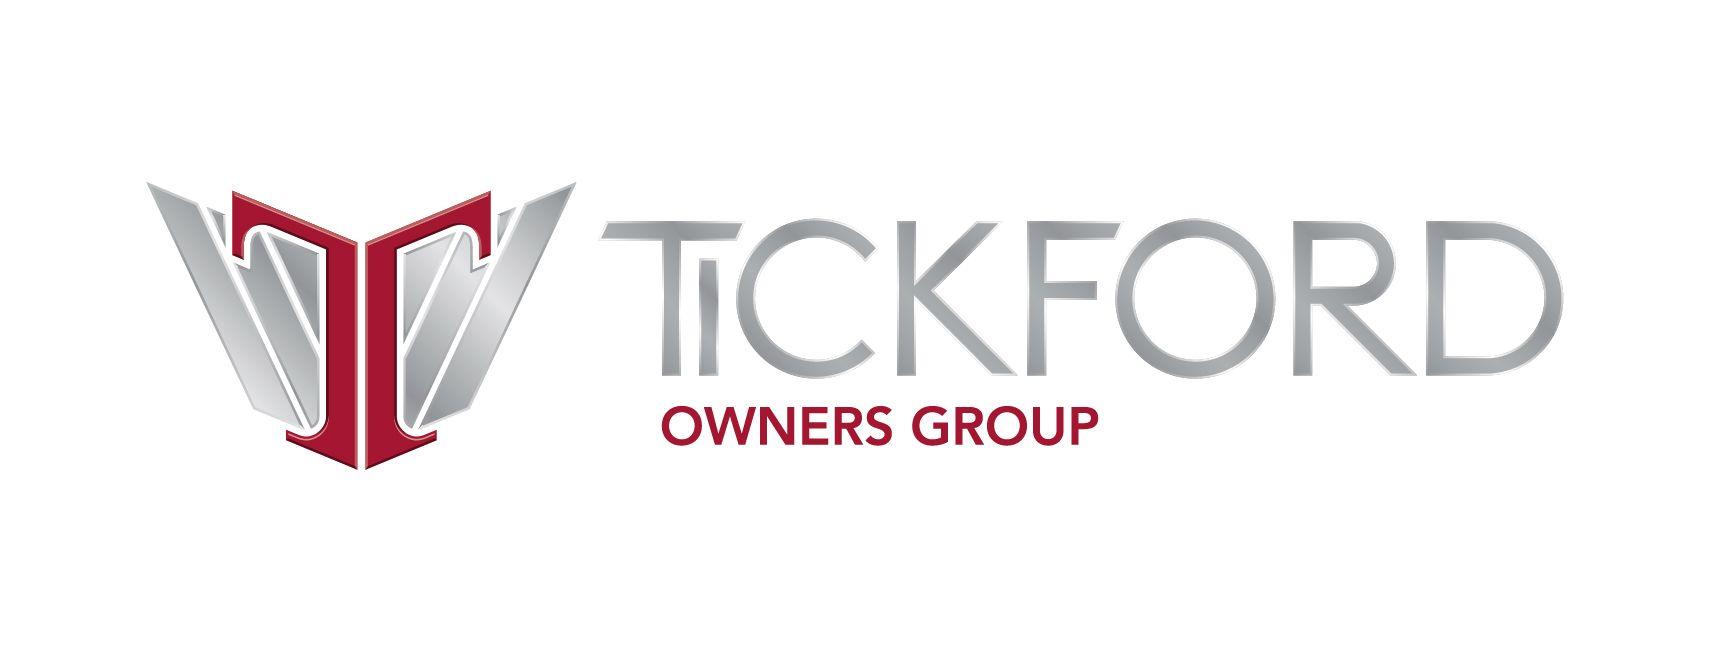 Tickford Logo - Tickford Owners Group Social Media Cover Pic Landscape B_proof